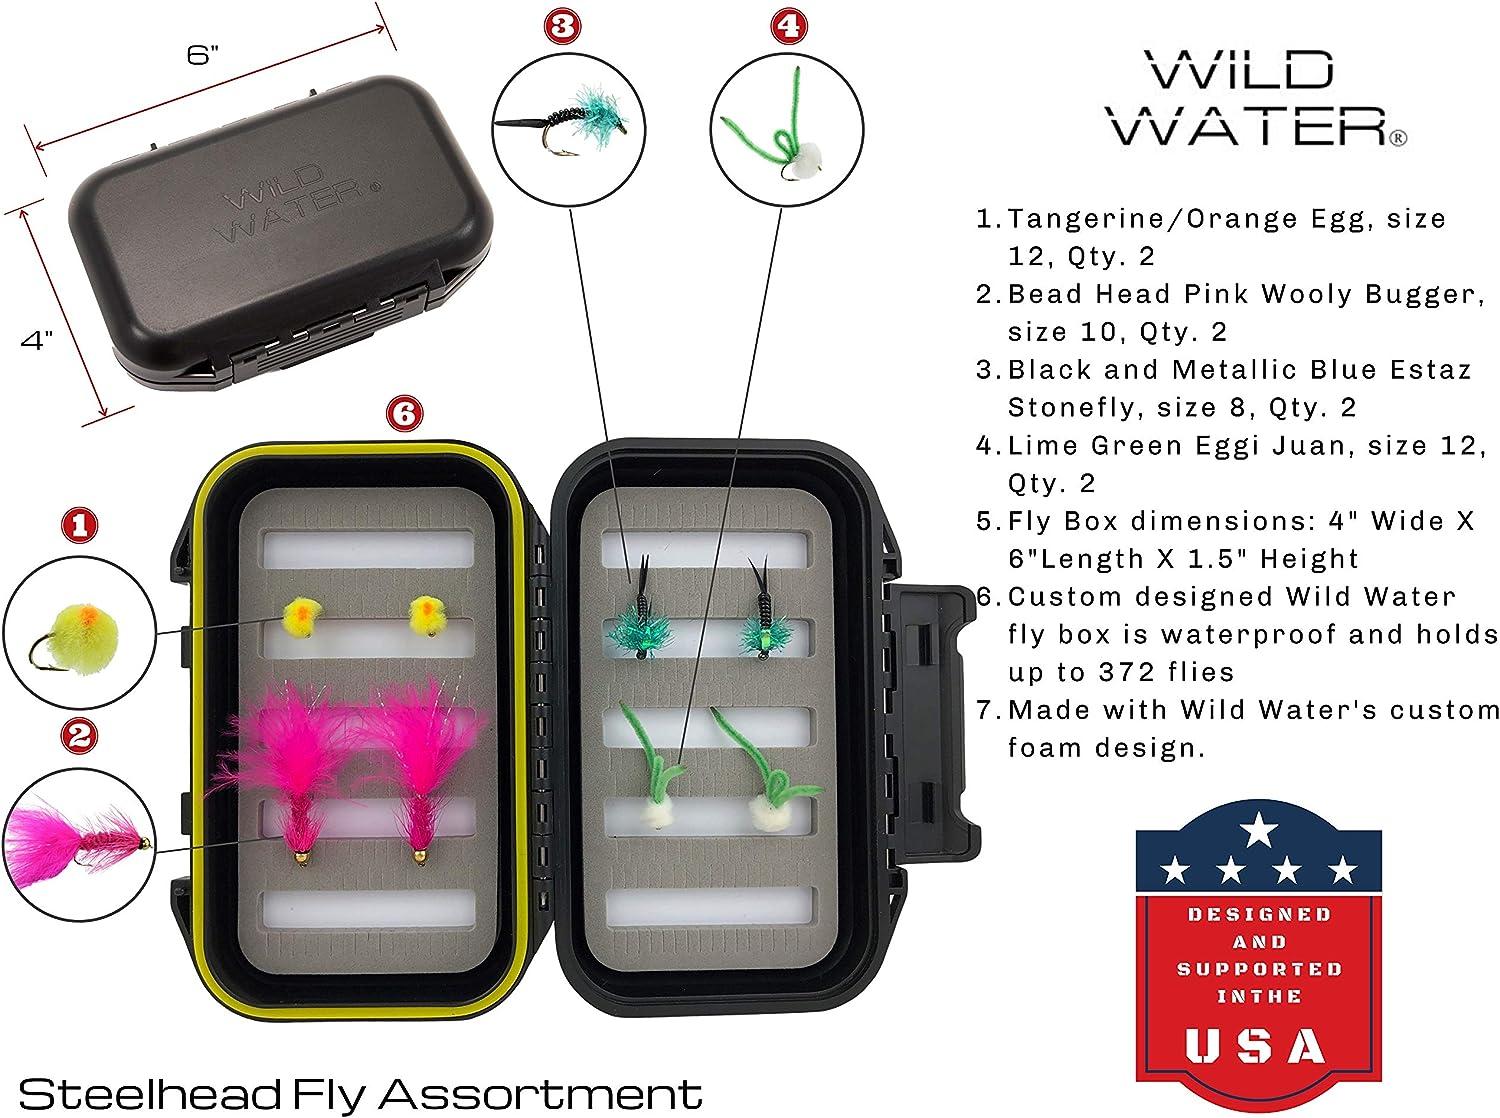 Wild Water Fly Fishing Complete 5 Weight 7 Piece Pack Rod and Reel Starter Package